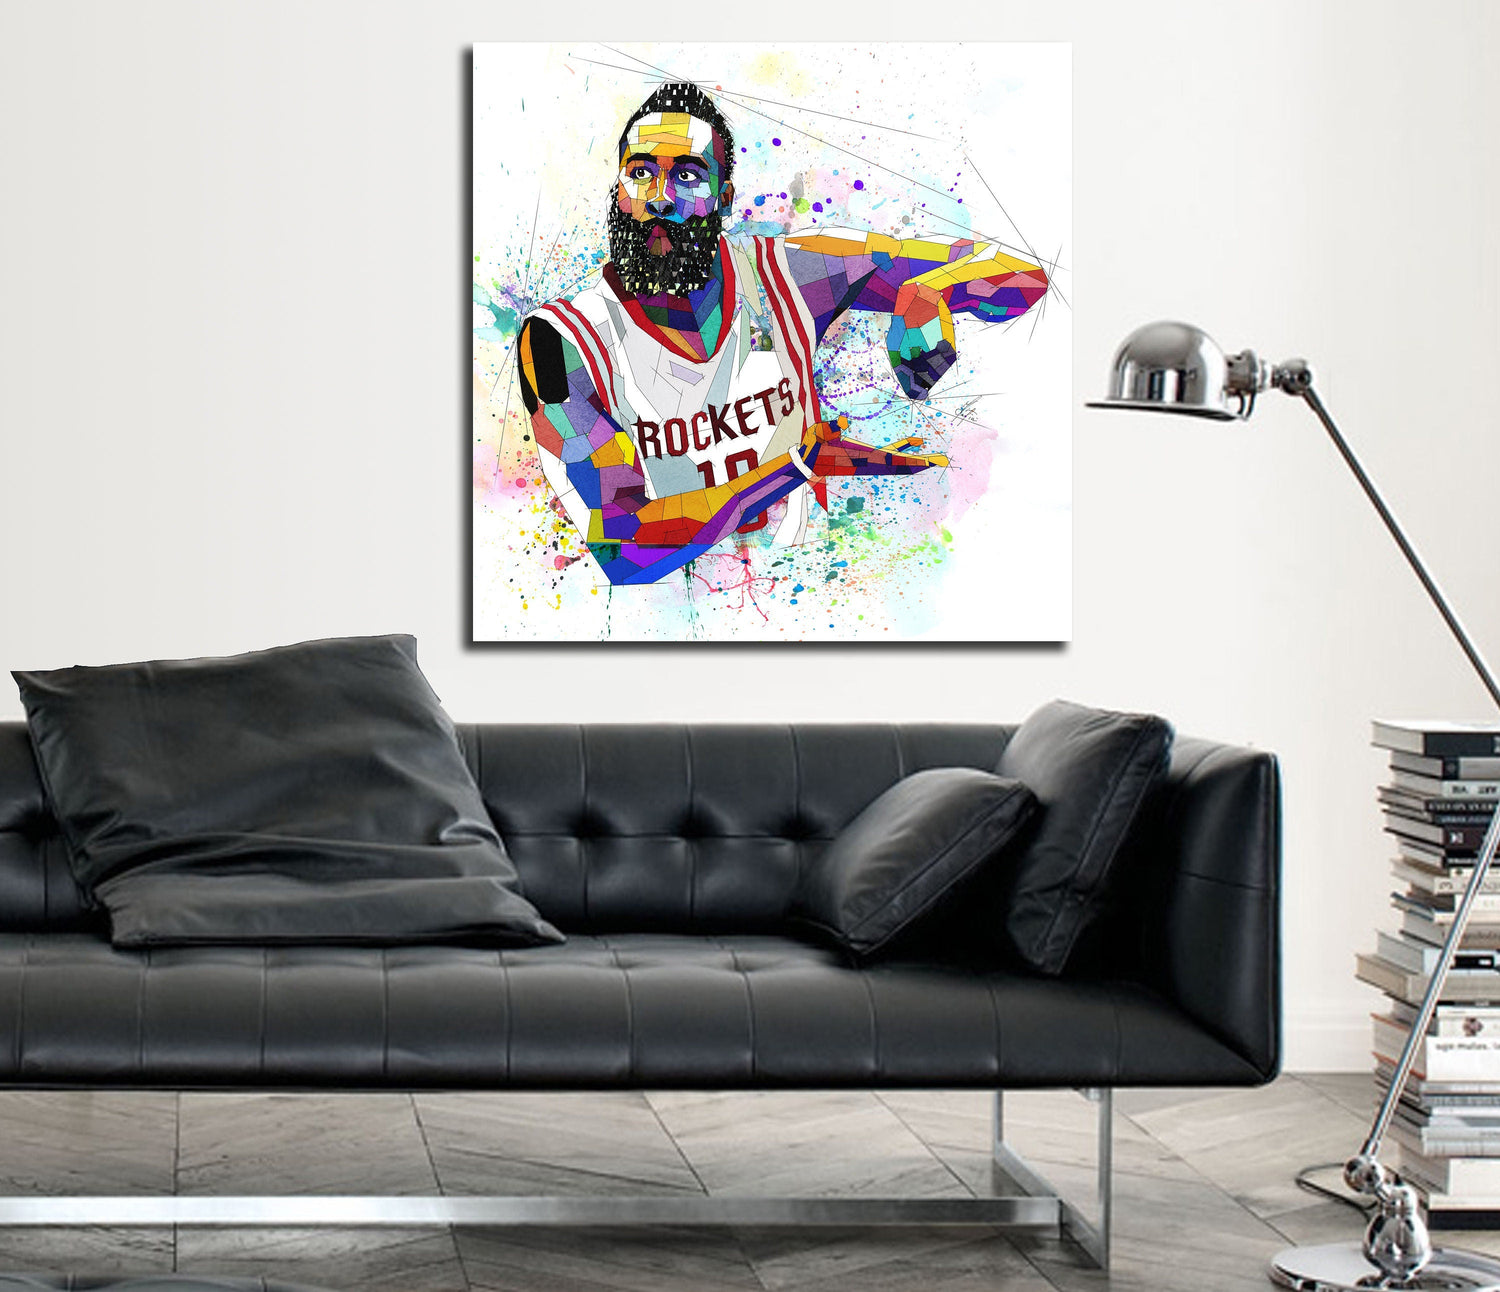  STAINA Basketball Player Poster James Harden Cover Picture (5)  Canvas Wall Art Poster Decorative Bedroom Modern Home Print Picture  Artworks Posters 12x18inch(30x45cm): Posters & Prints